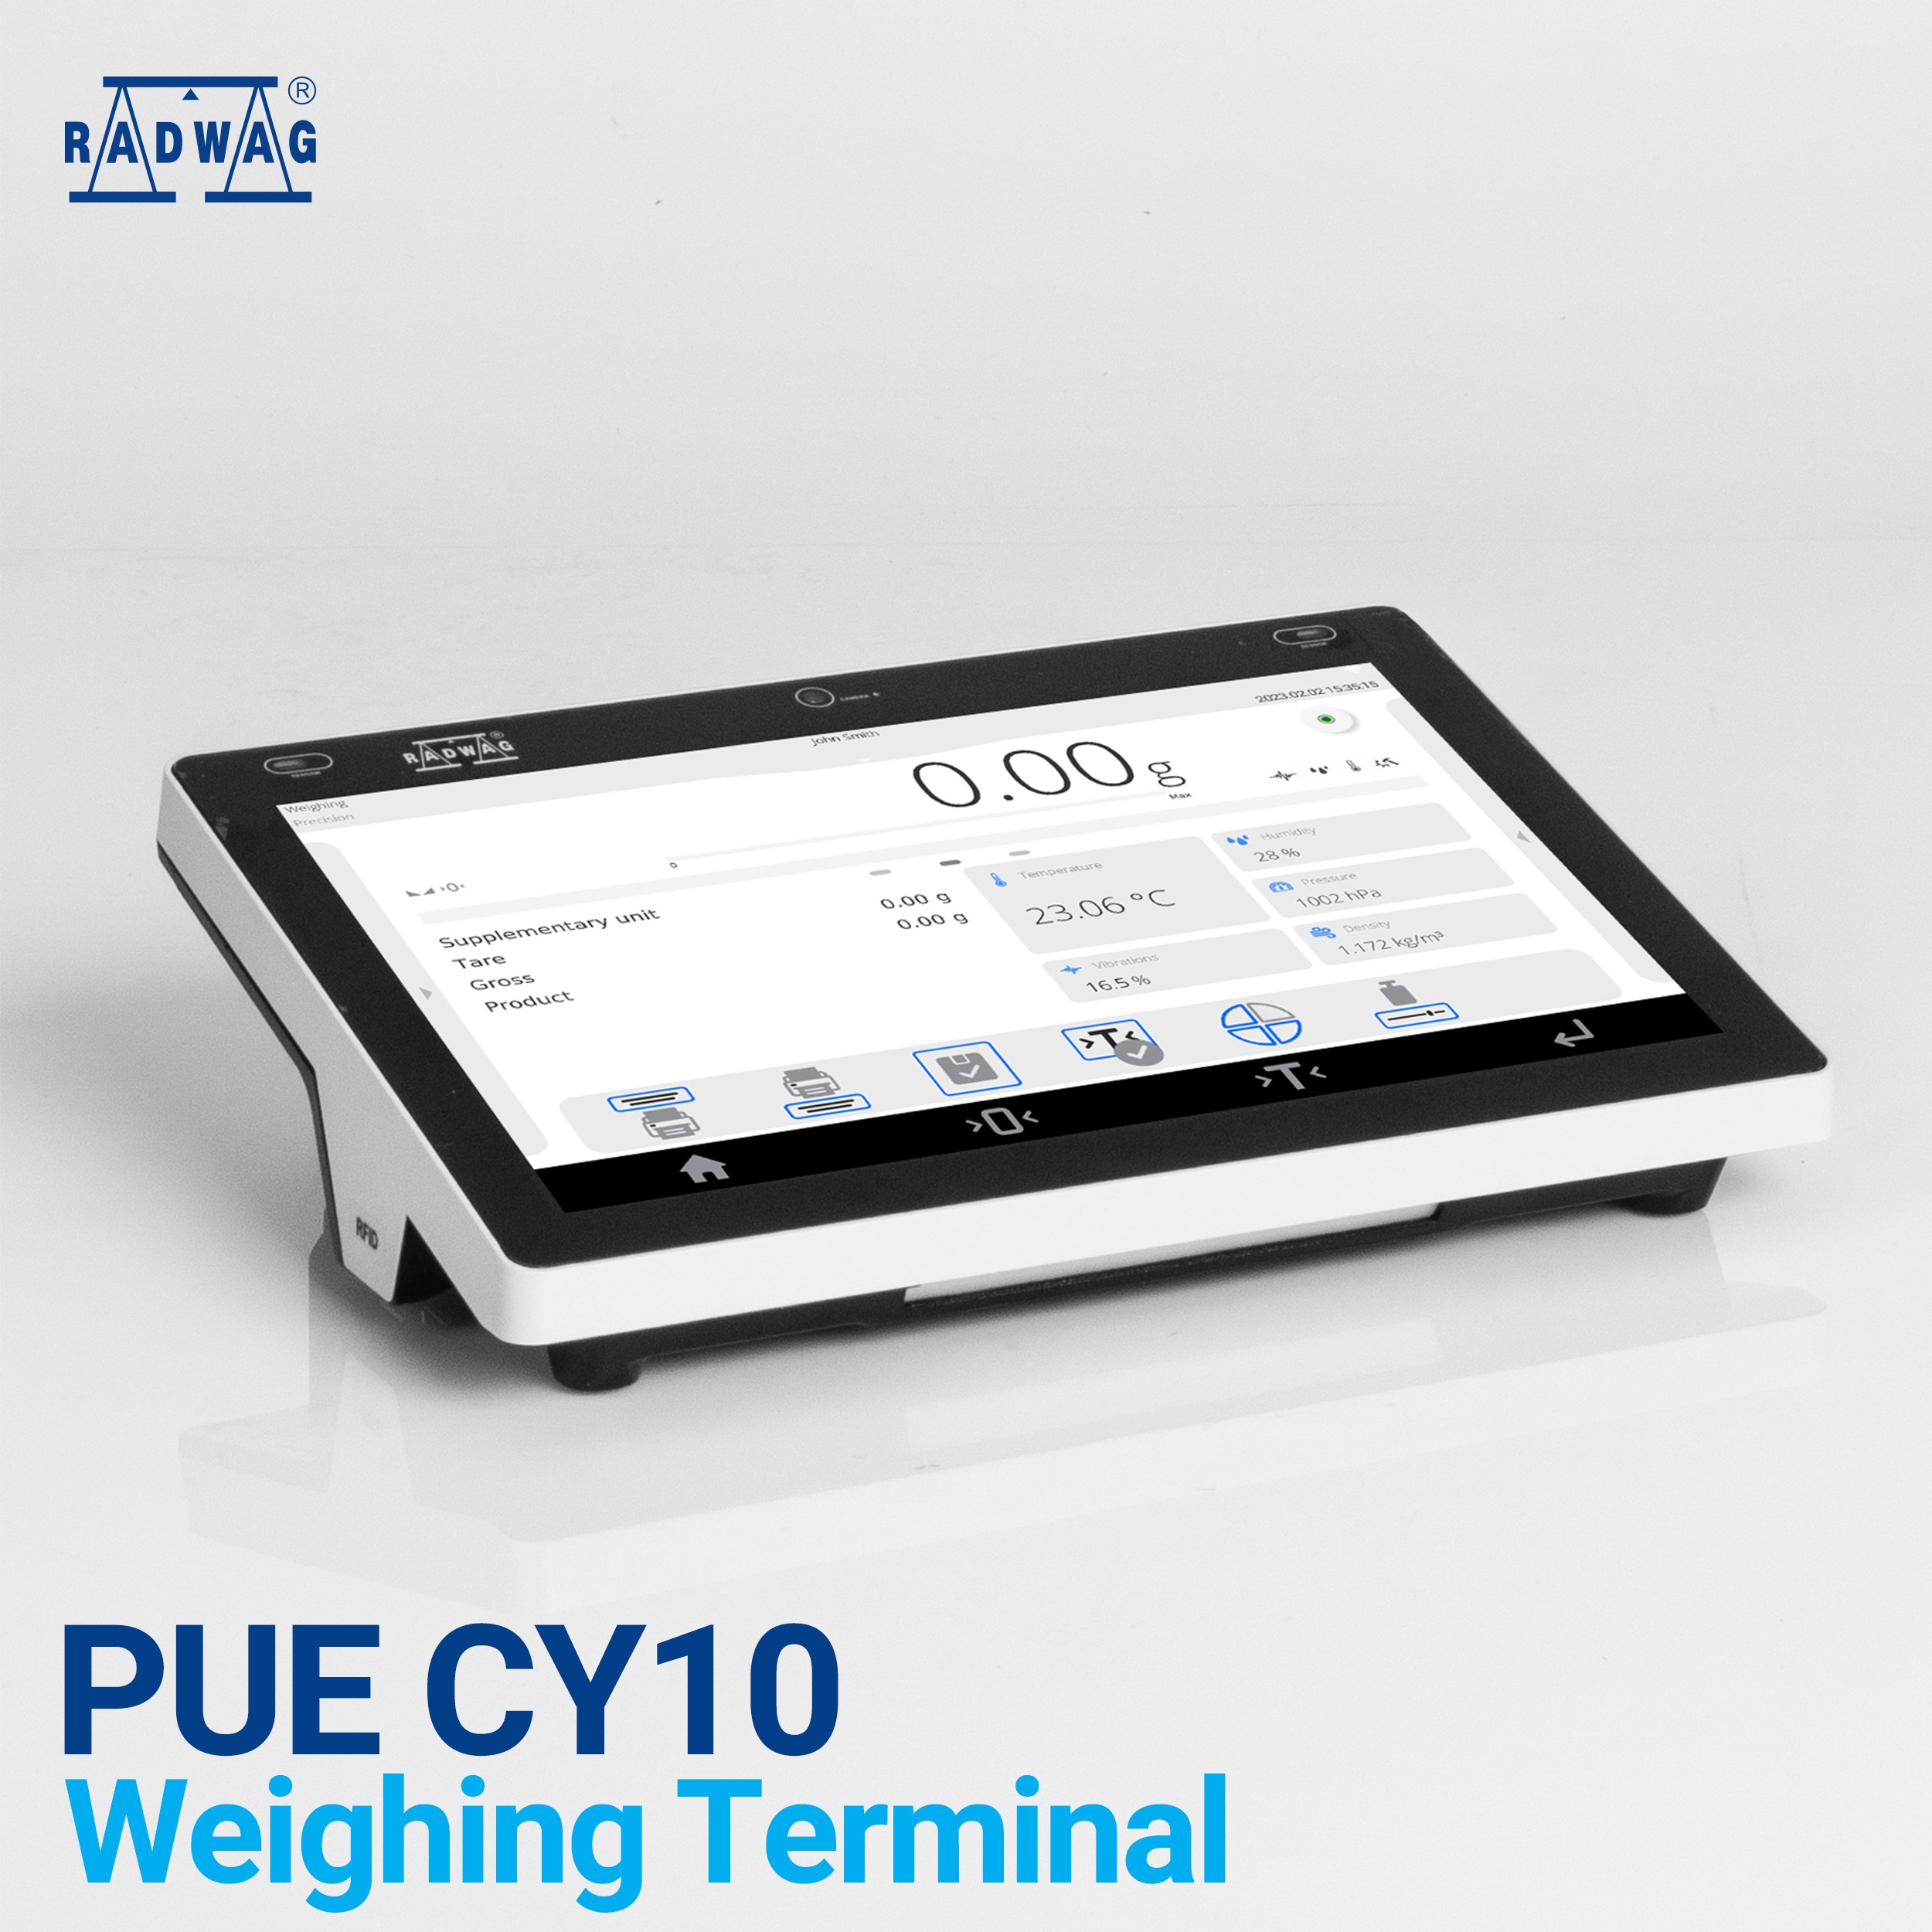 RADWAG PUE CY10 Advanced Terminal For Modern Industry